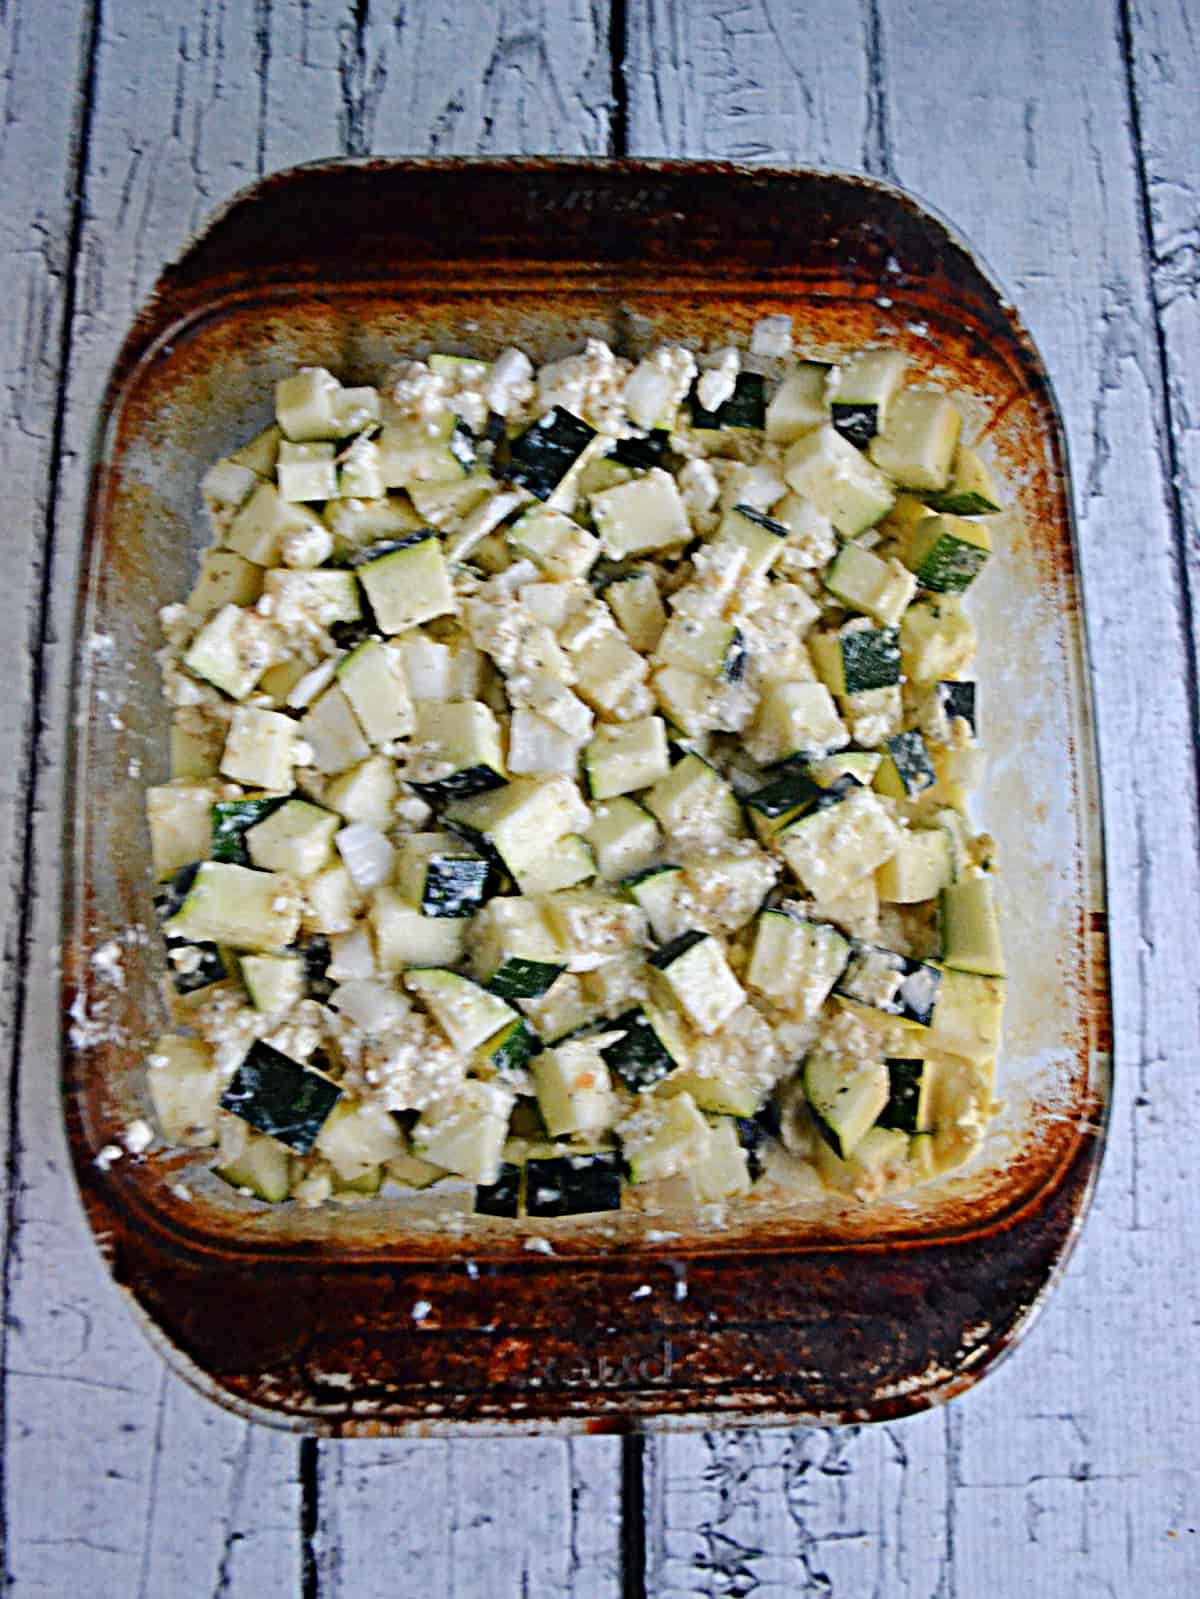 A dish with zucchini, cheese, and breadcrumbs.